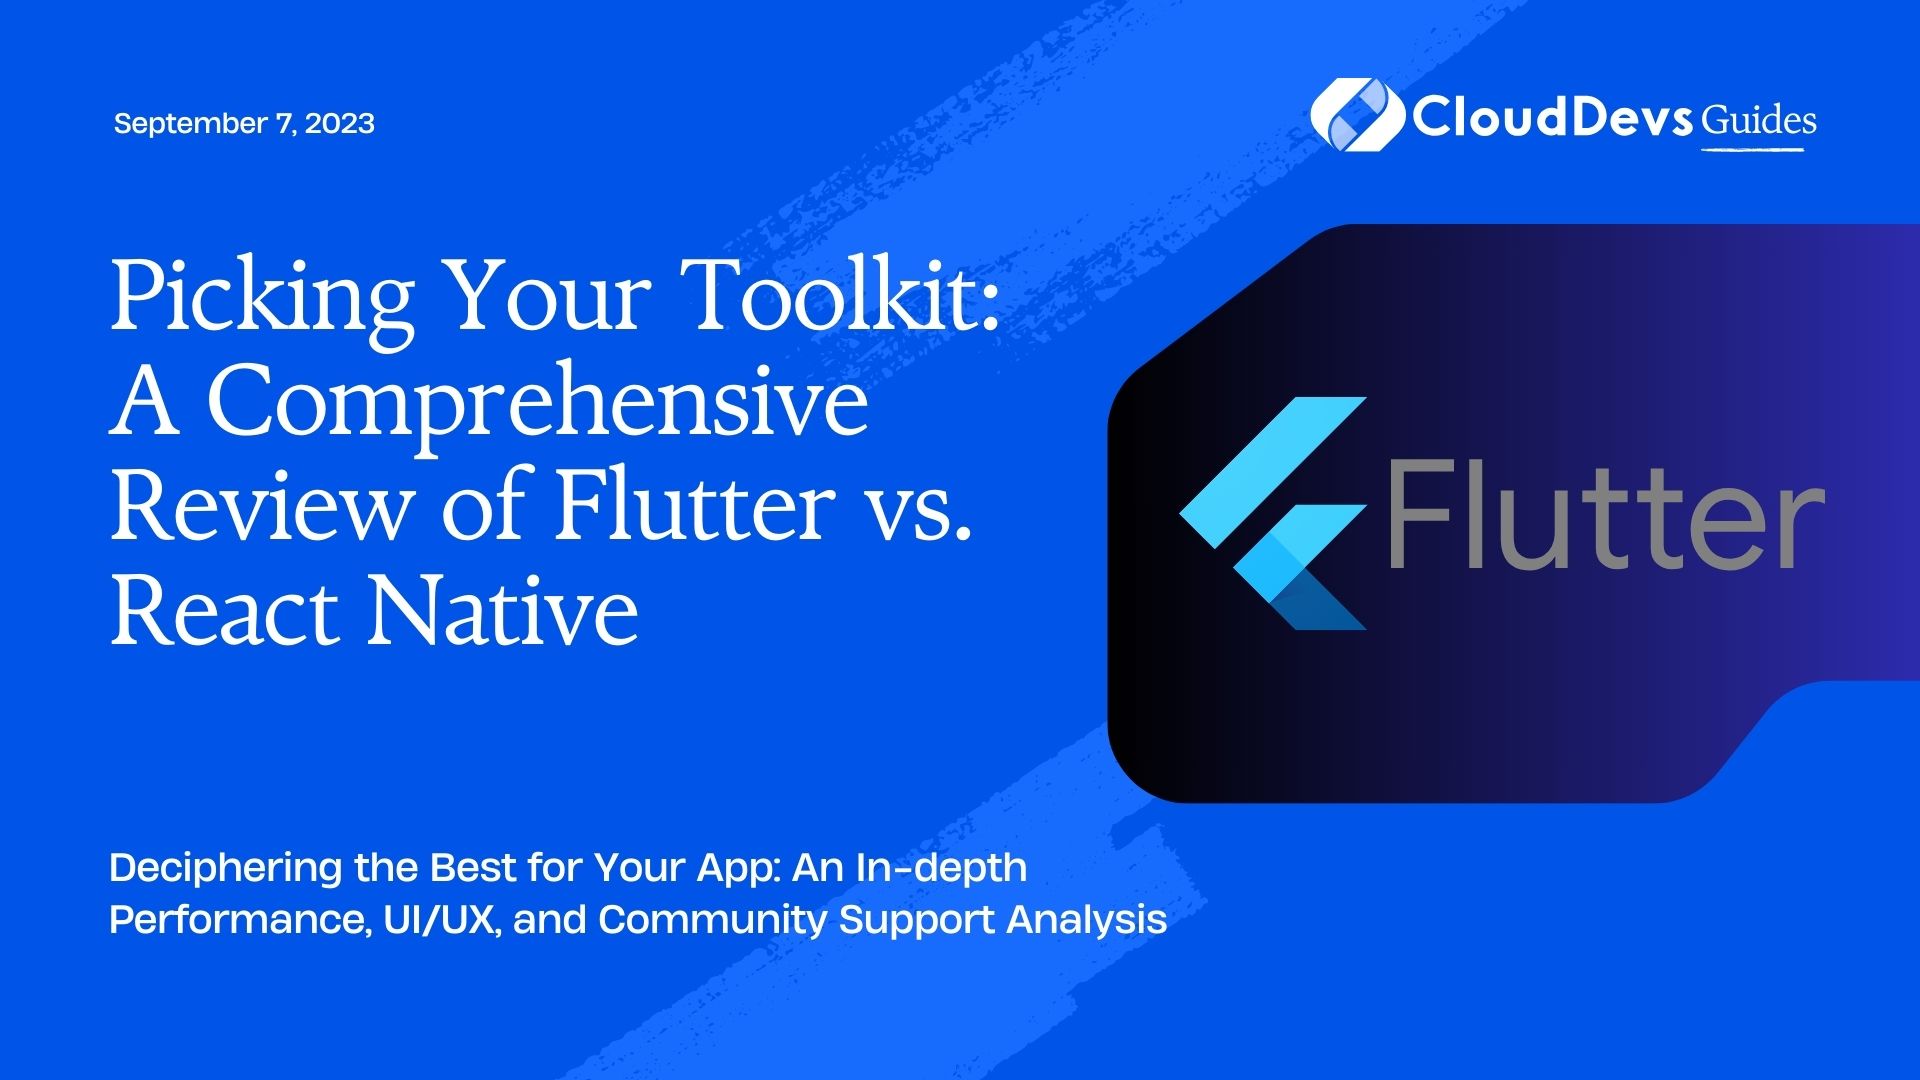 Picking Your Toolkit: A Comprehensive Review of Flutter vs. React Native